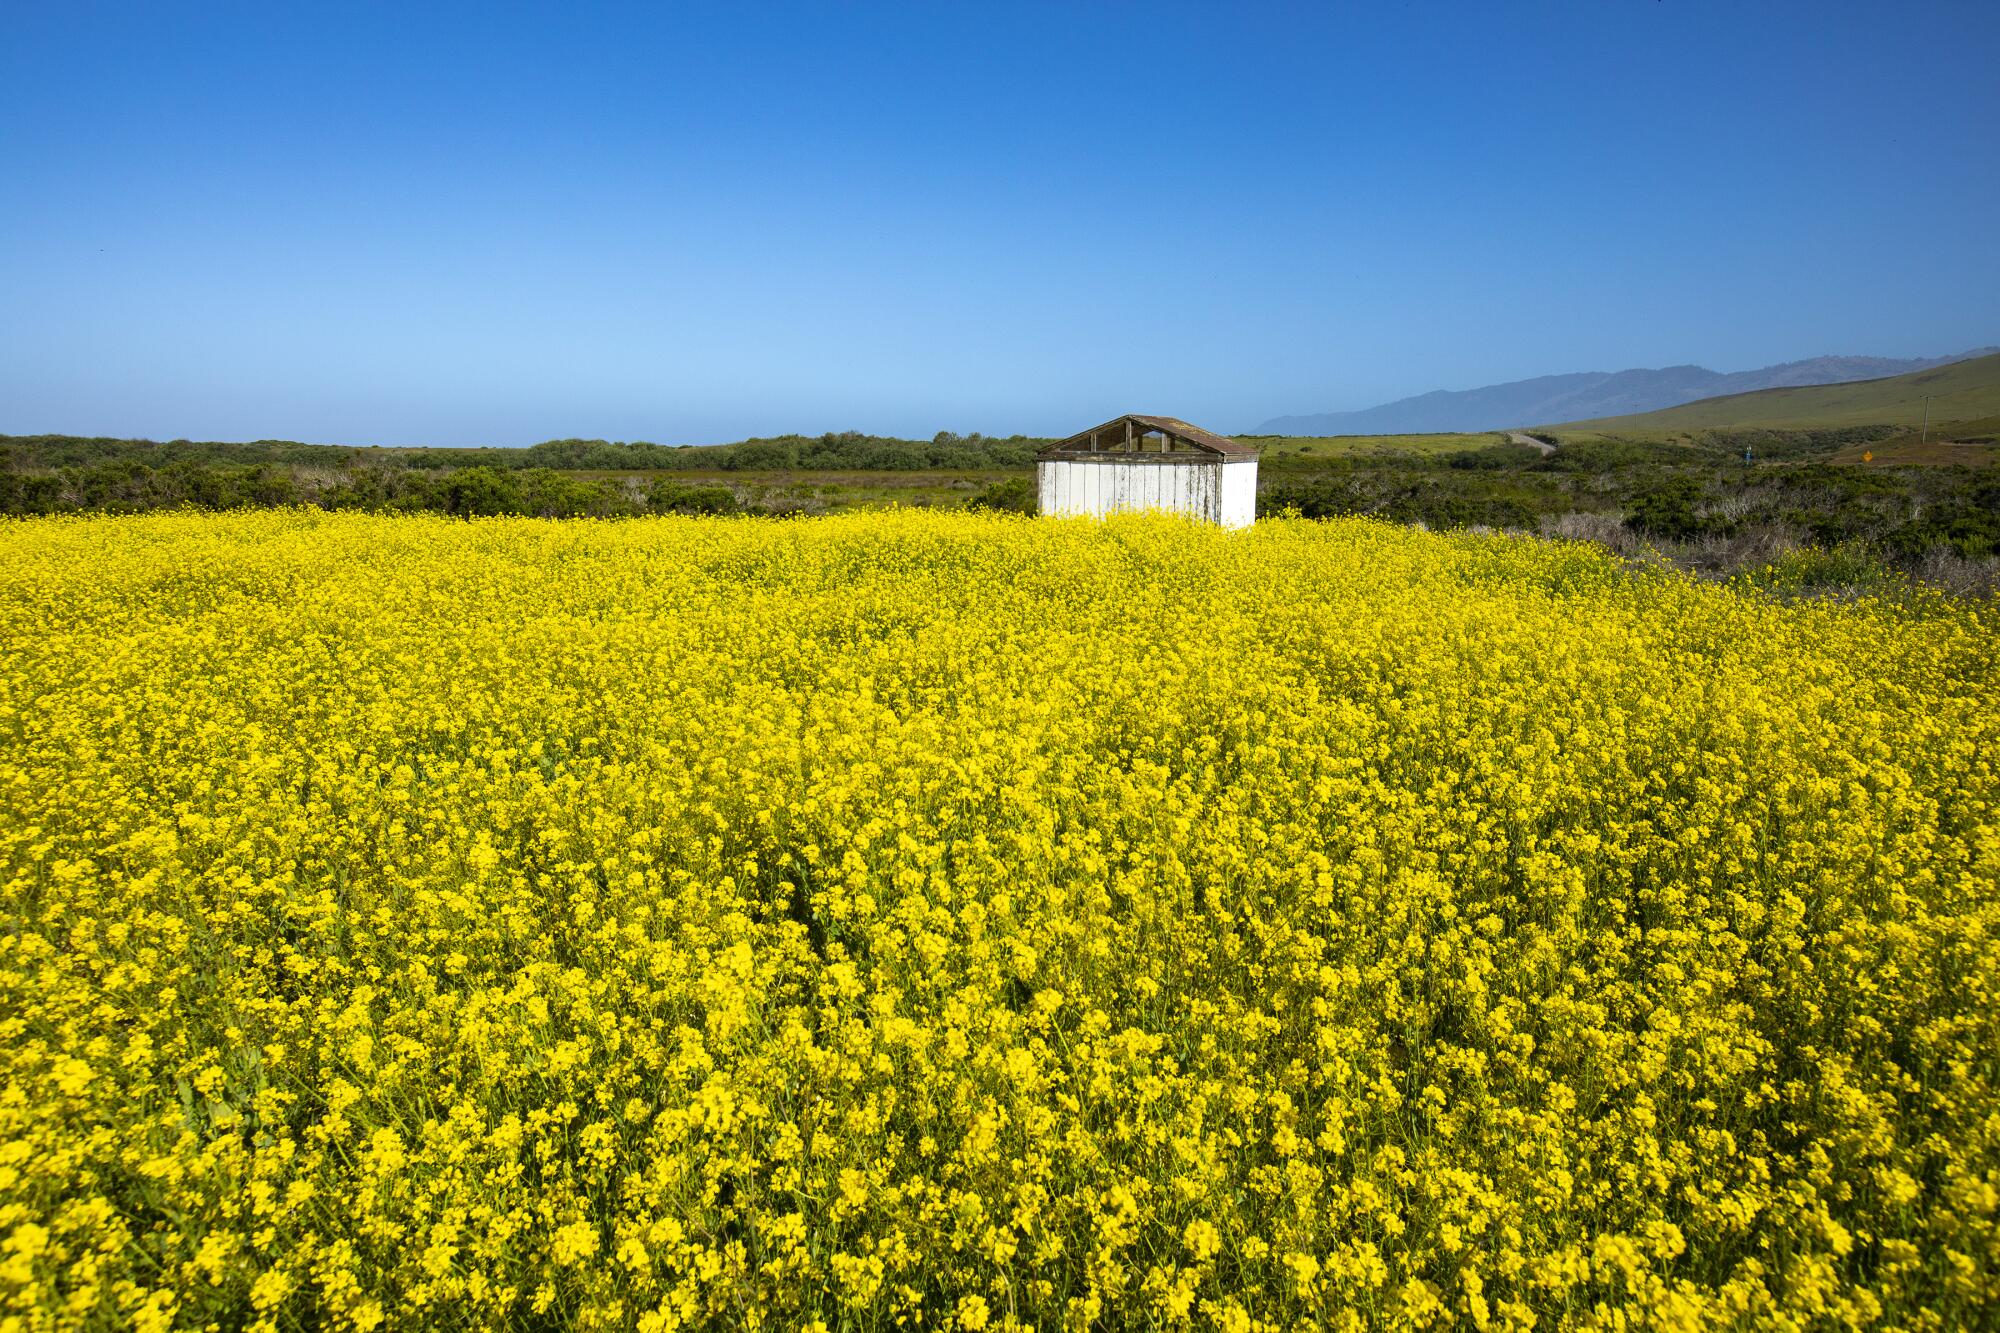 A field of bright yellow flowers with an outbuilding in the background.